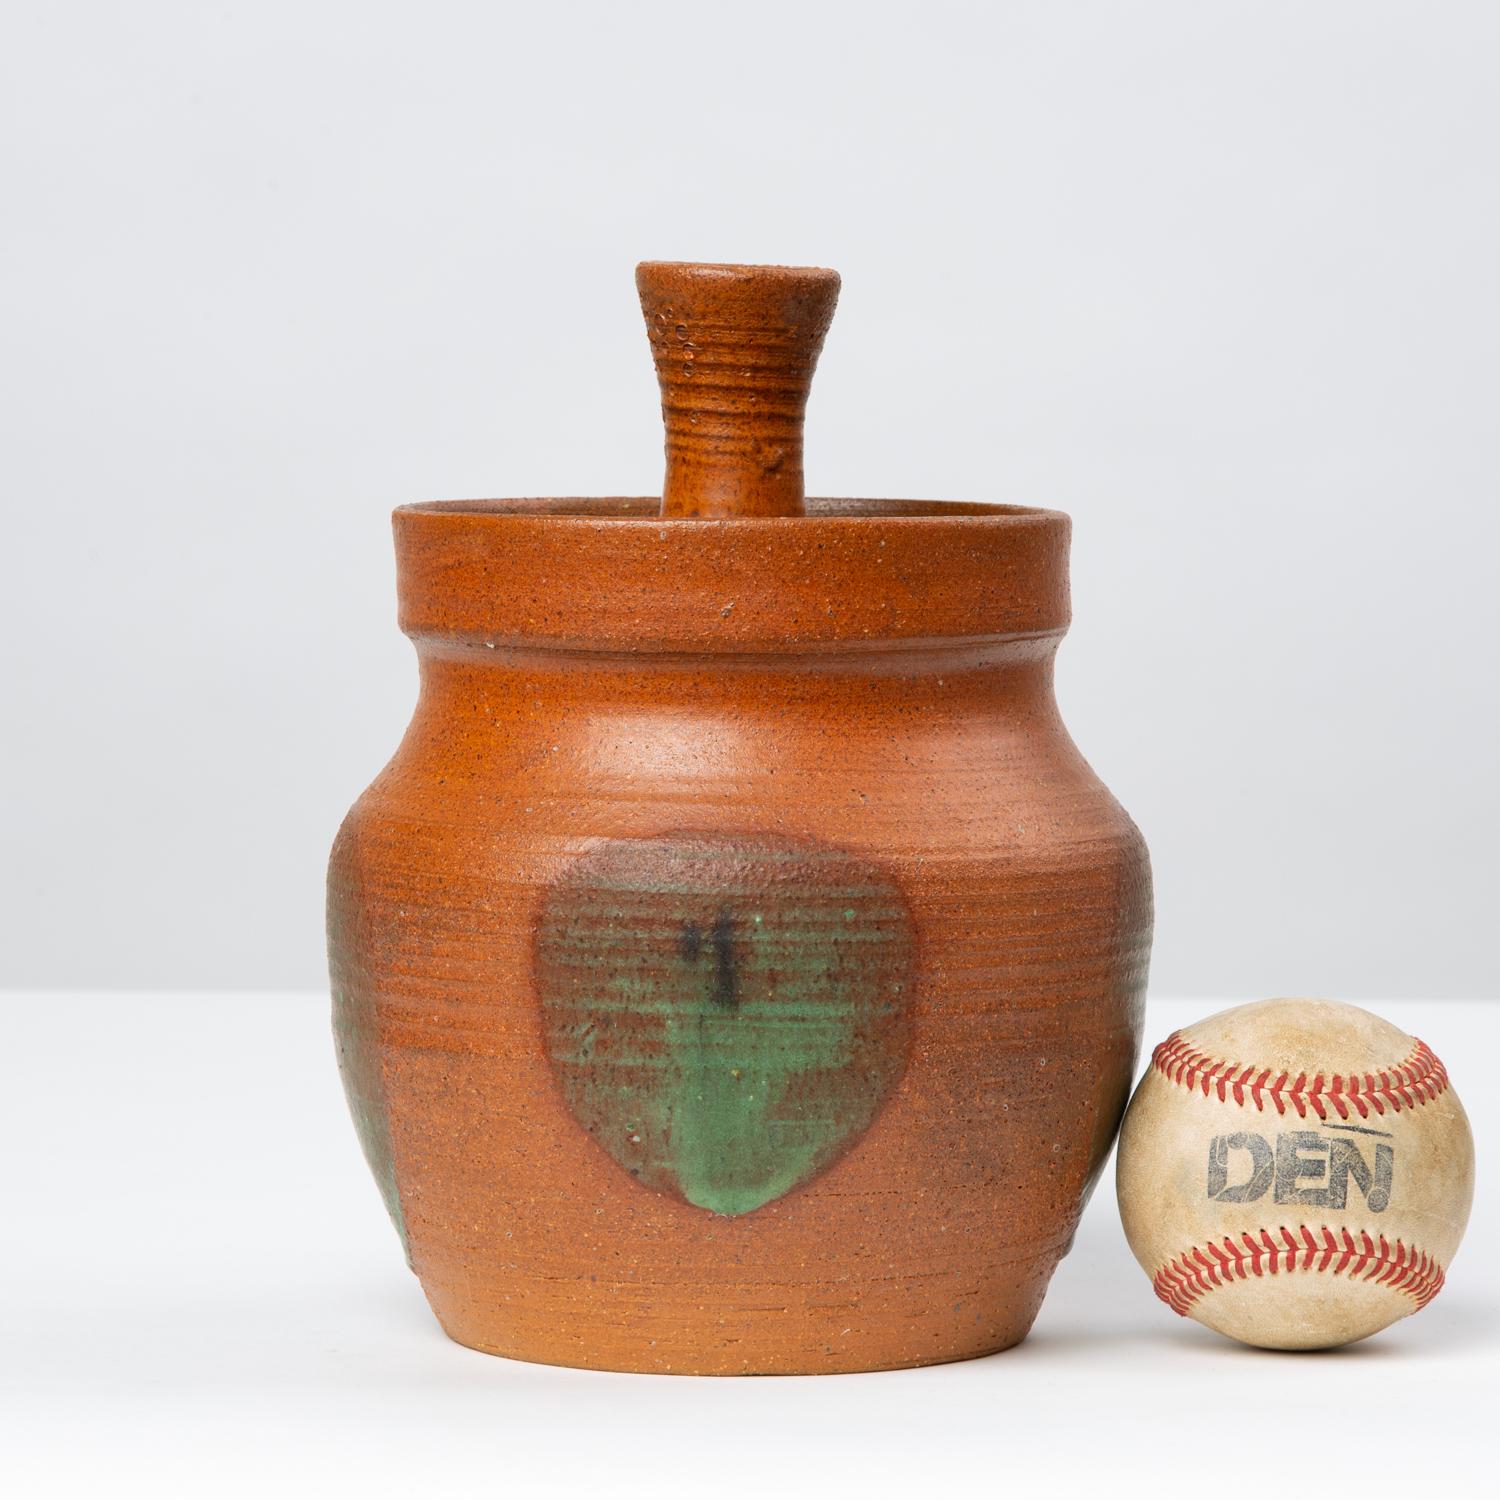 A wheel thrown ceramic jar with pleasingly rounded sides and a lid in a rust red glaze. The handle of the jar is turned as well. Slightly raised spots in a green drip glaze adorn each pole of the jar. Signed “Doc Nelson” on underside.

Condition: